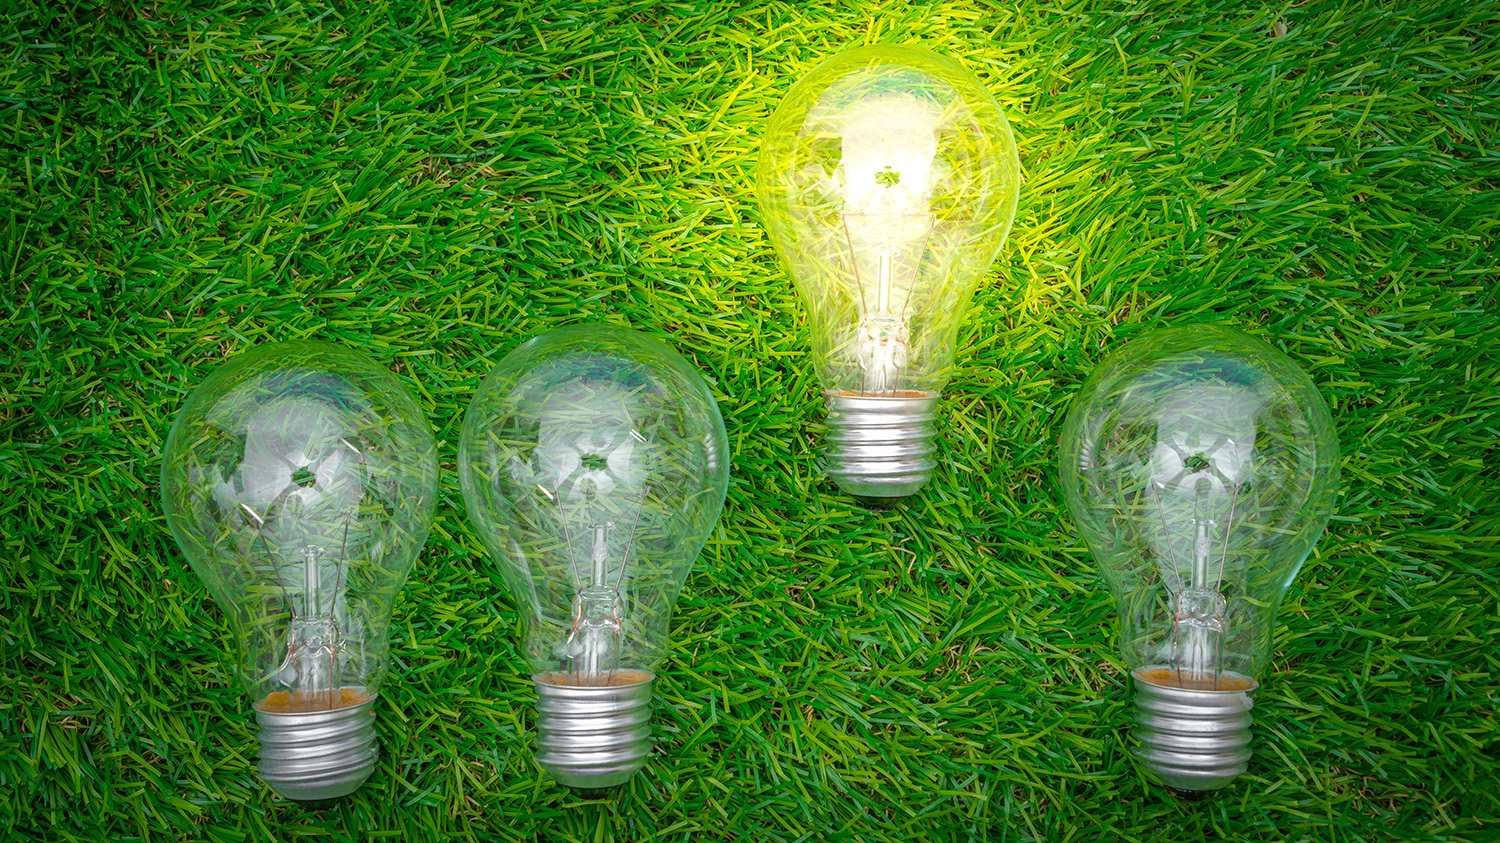 Eco concept - light bulb grow in the grass